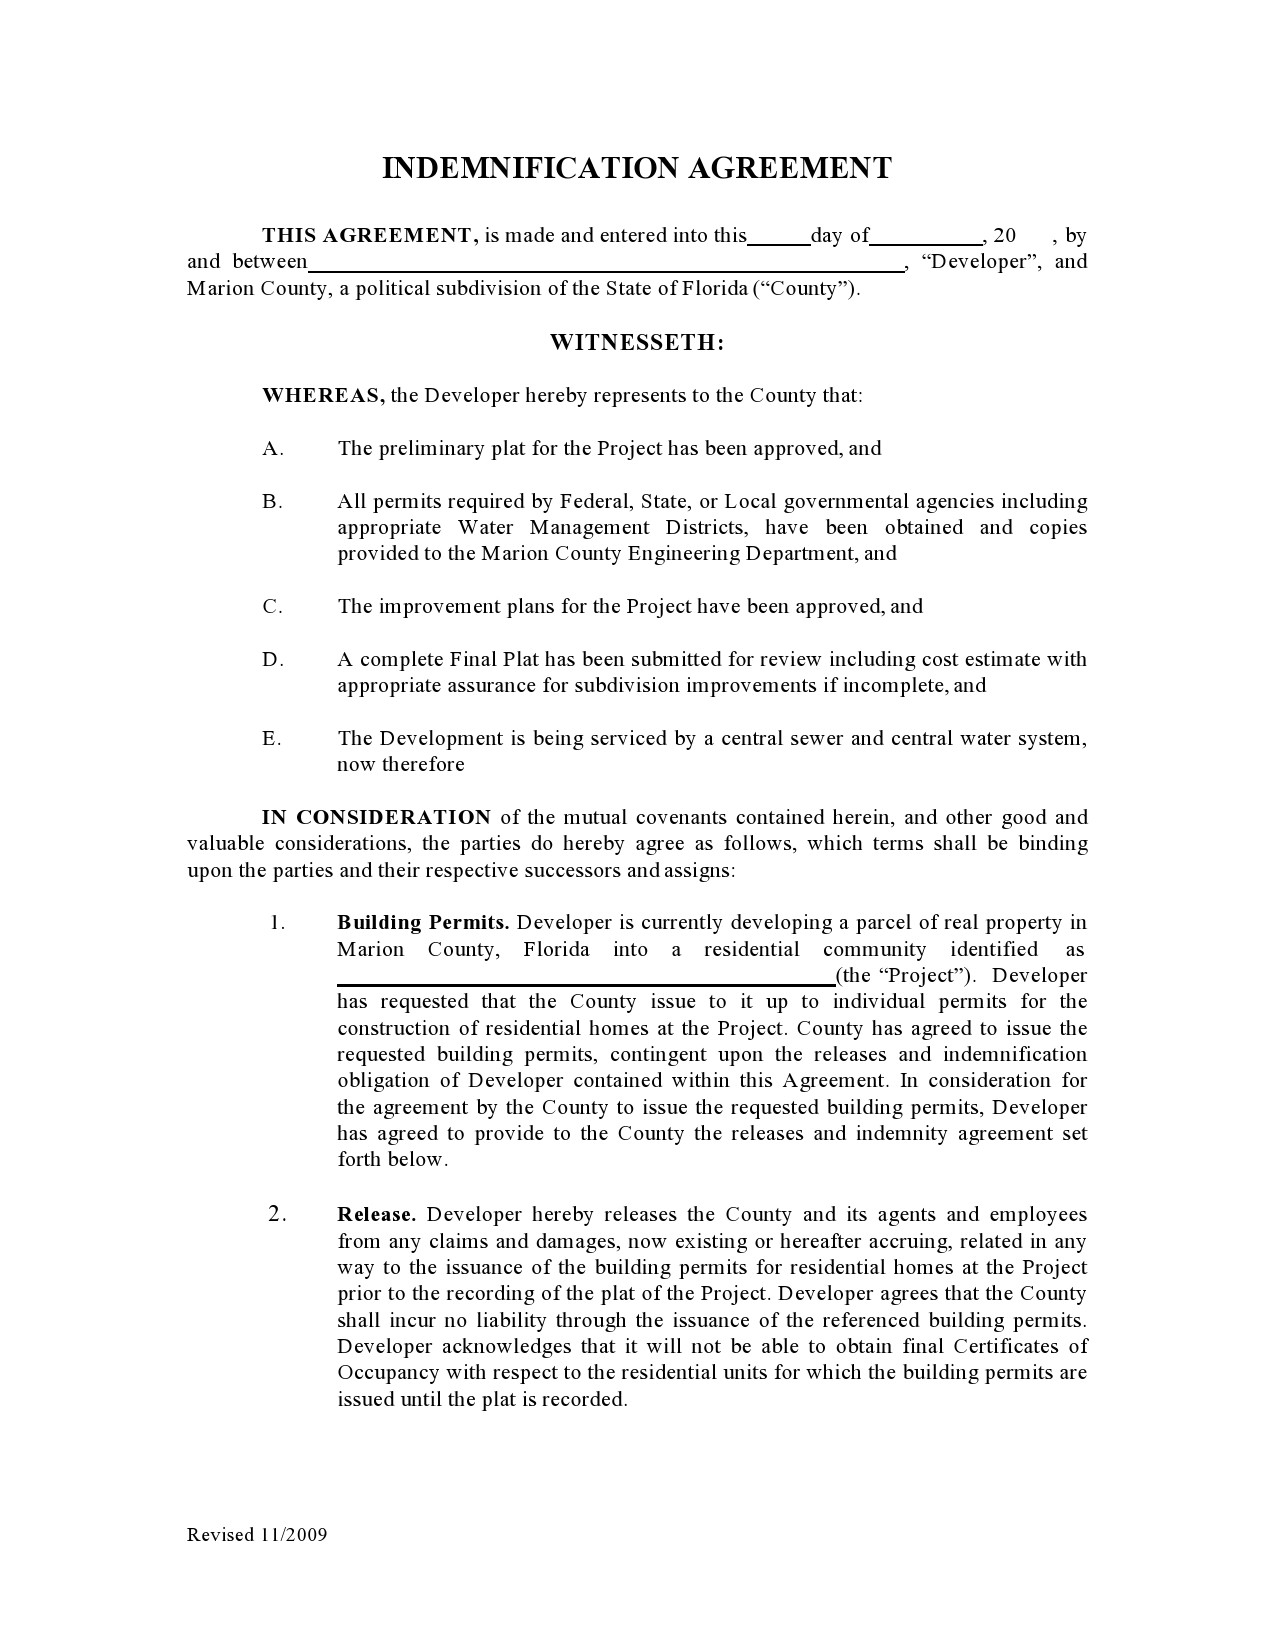 Free indemnification agreement 20